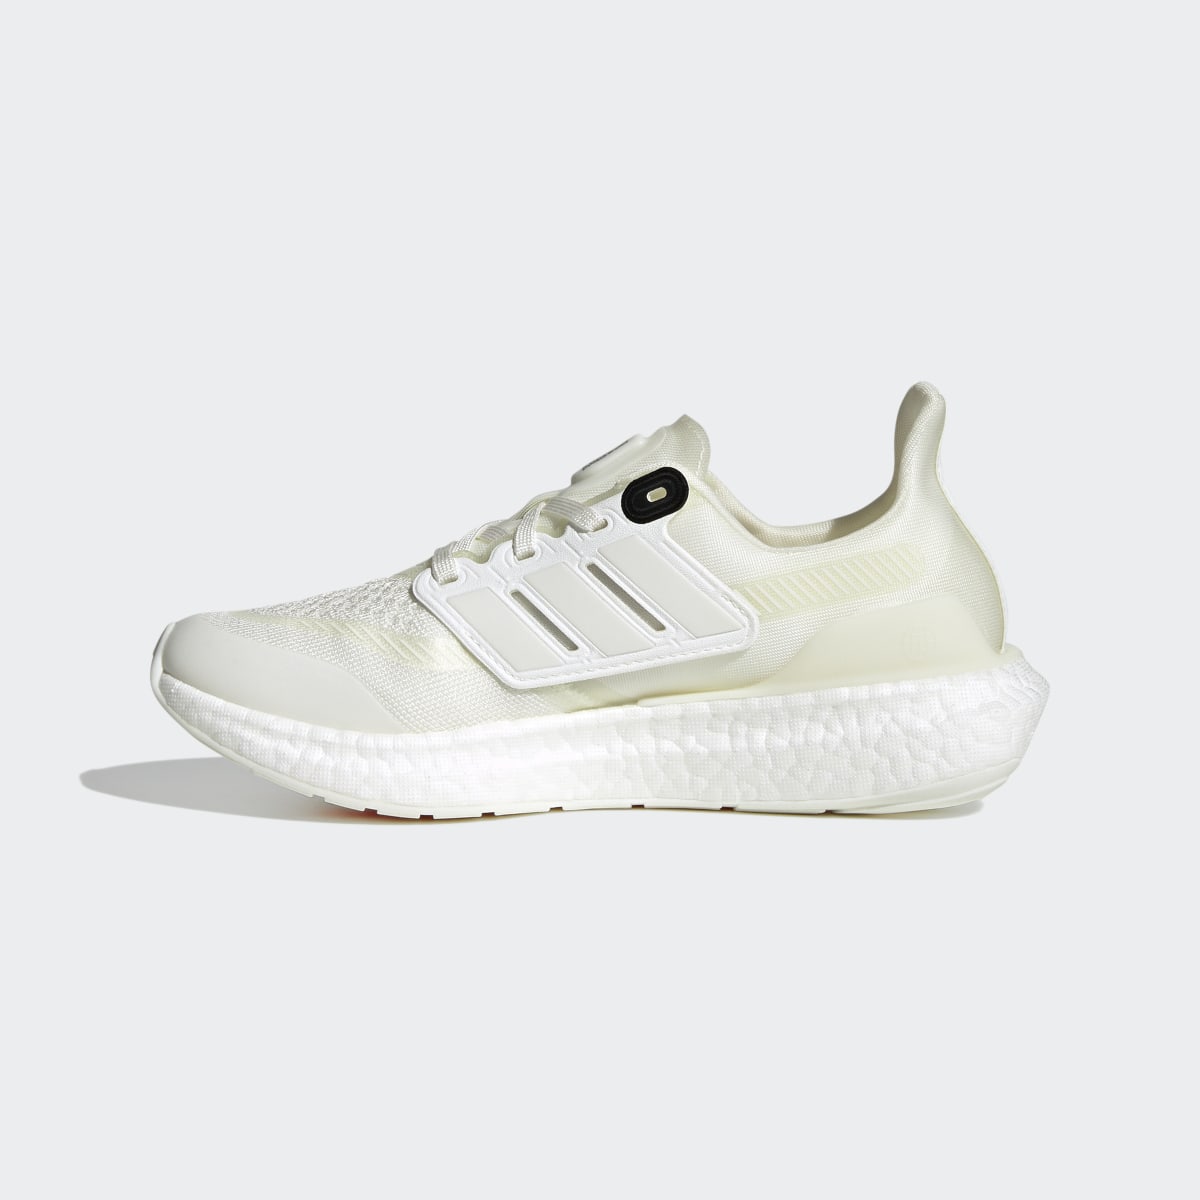 Adidas Zapatilla Ultraboost Made to Be Remade 2.0. 10